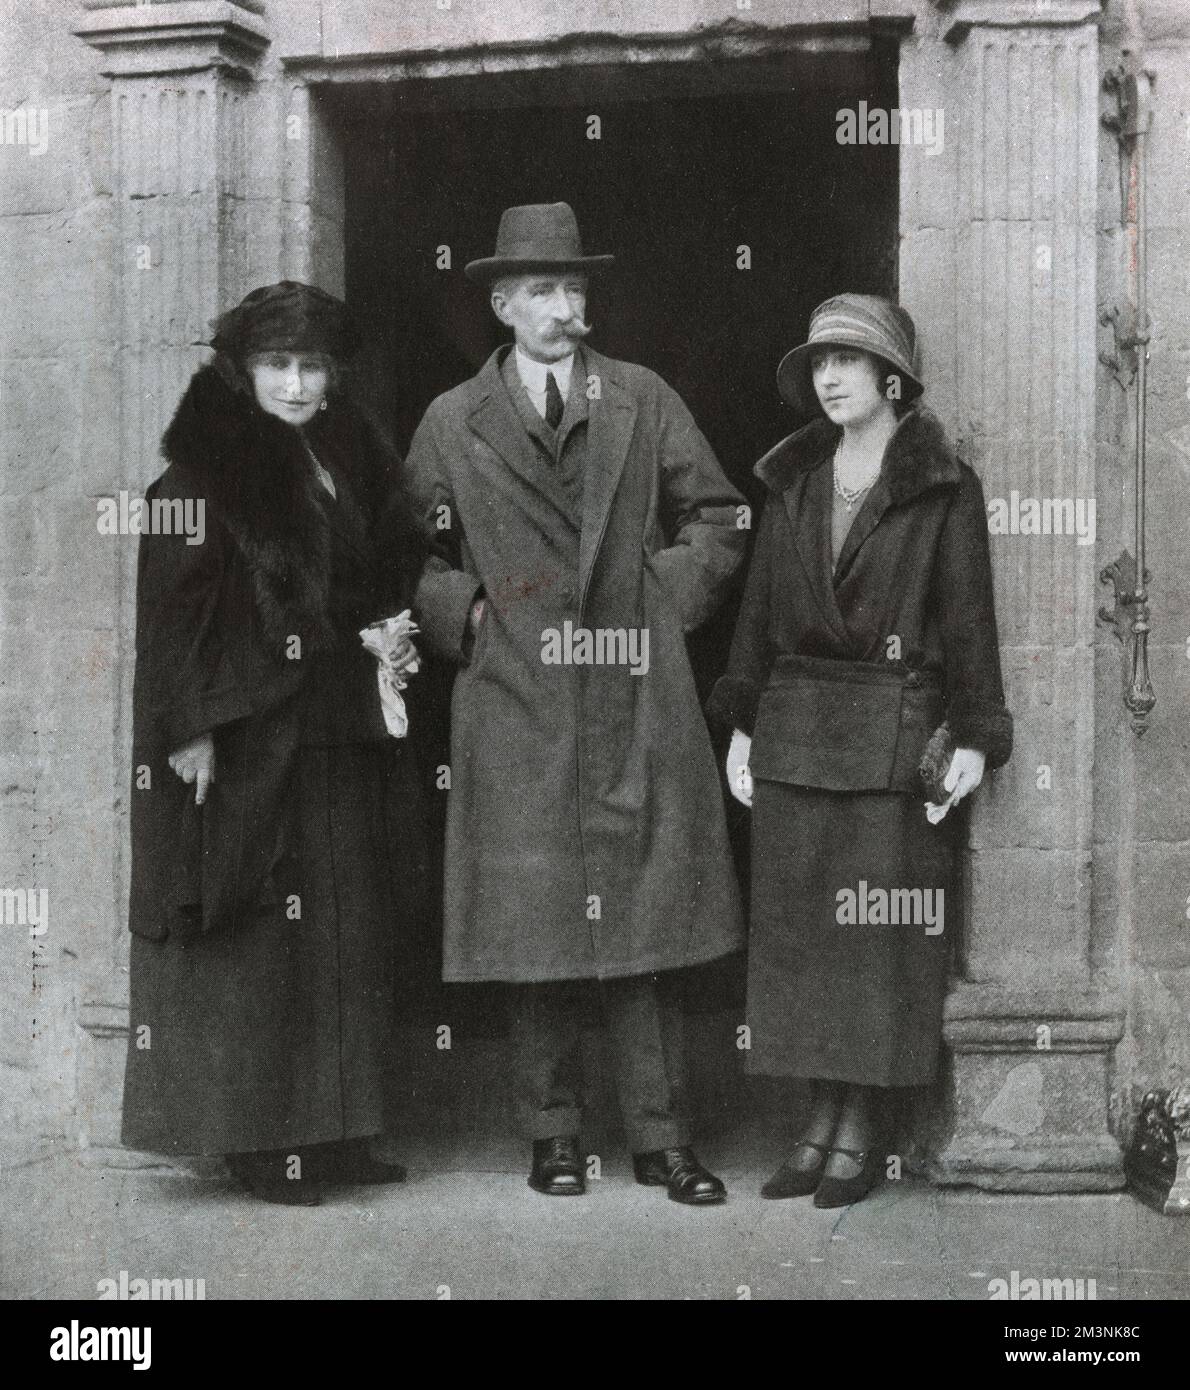 Lady Elizabeth Angela Margeurite Bowes-Lyon (1900 -2002), Duchess of York, Queen Elizabeth, the Queen Mother, pictured with her parents the Earl and Countess of Strathmore at the family home of Glamis Castle in Forfarshire, Scotland.     Date: 1923 Stock Photo